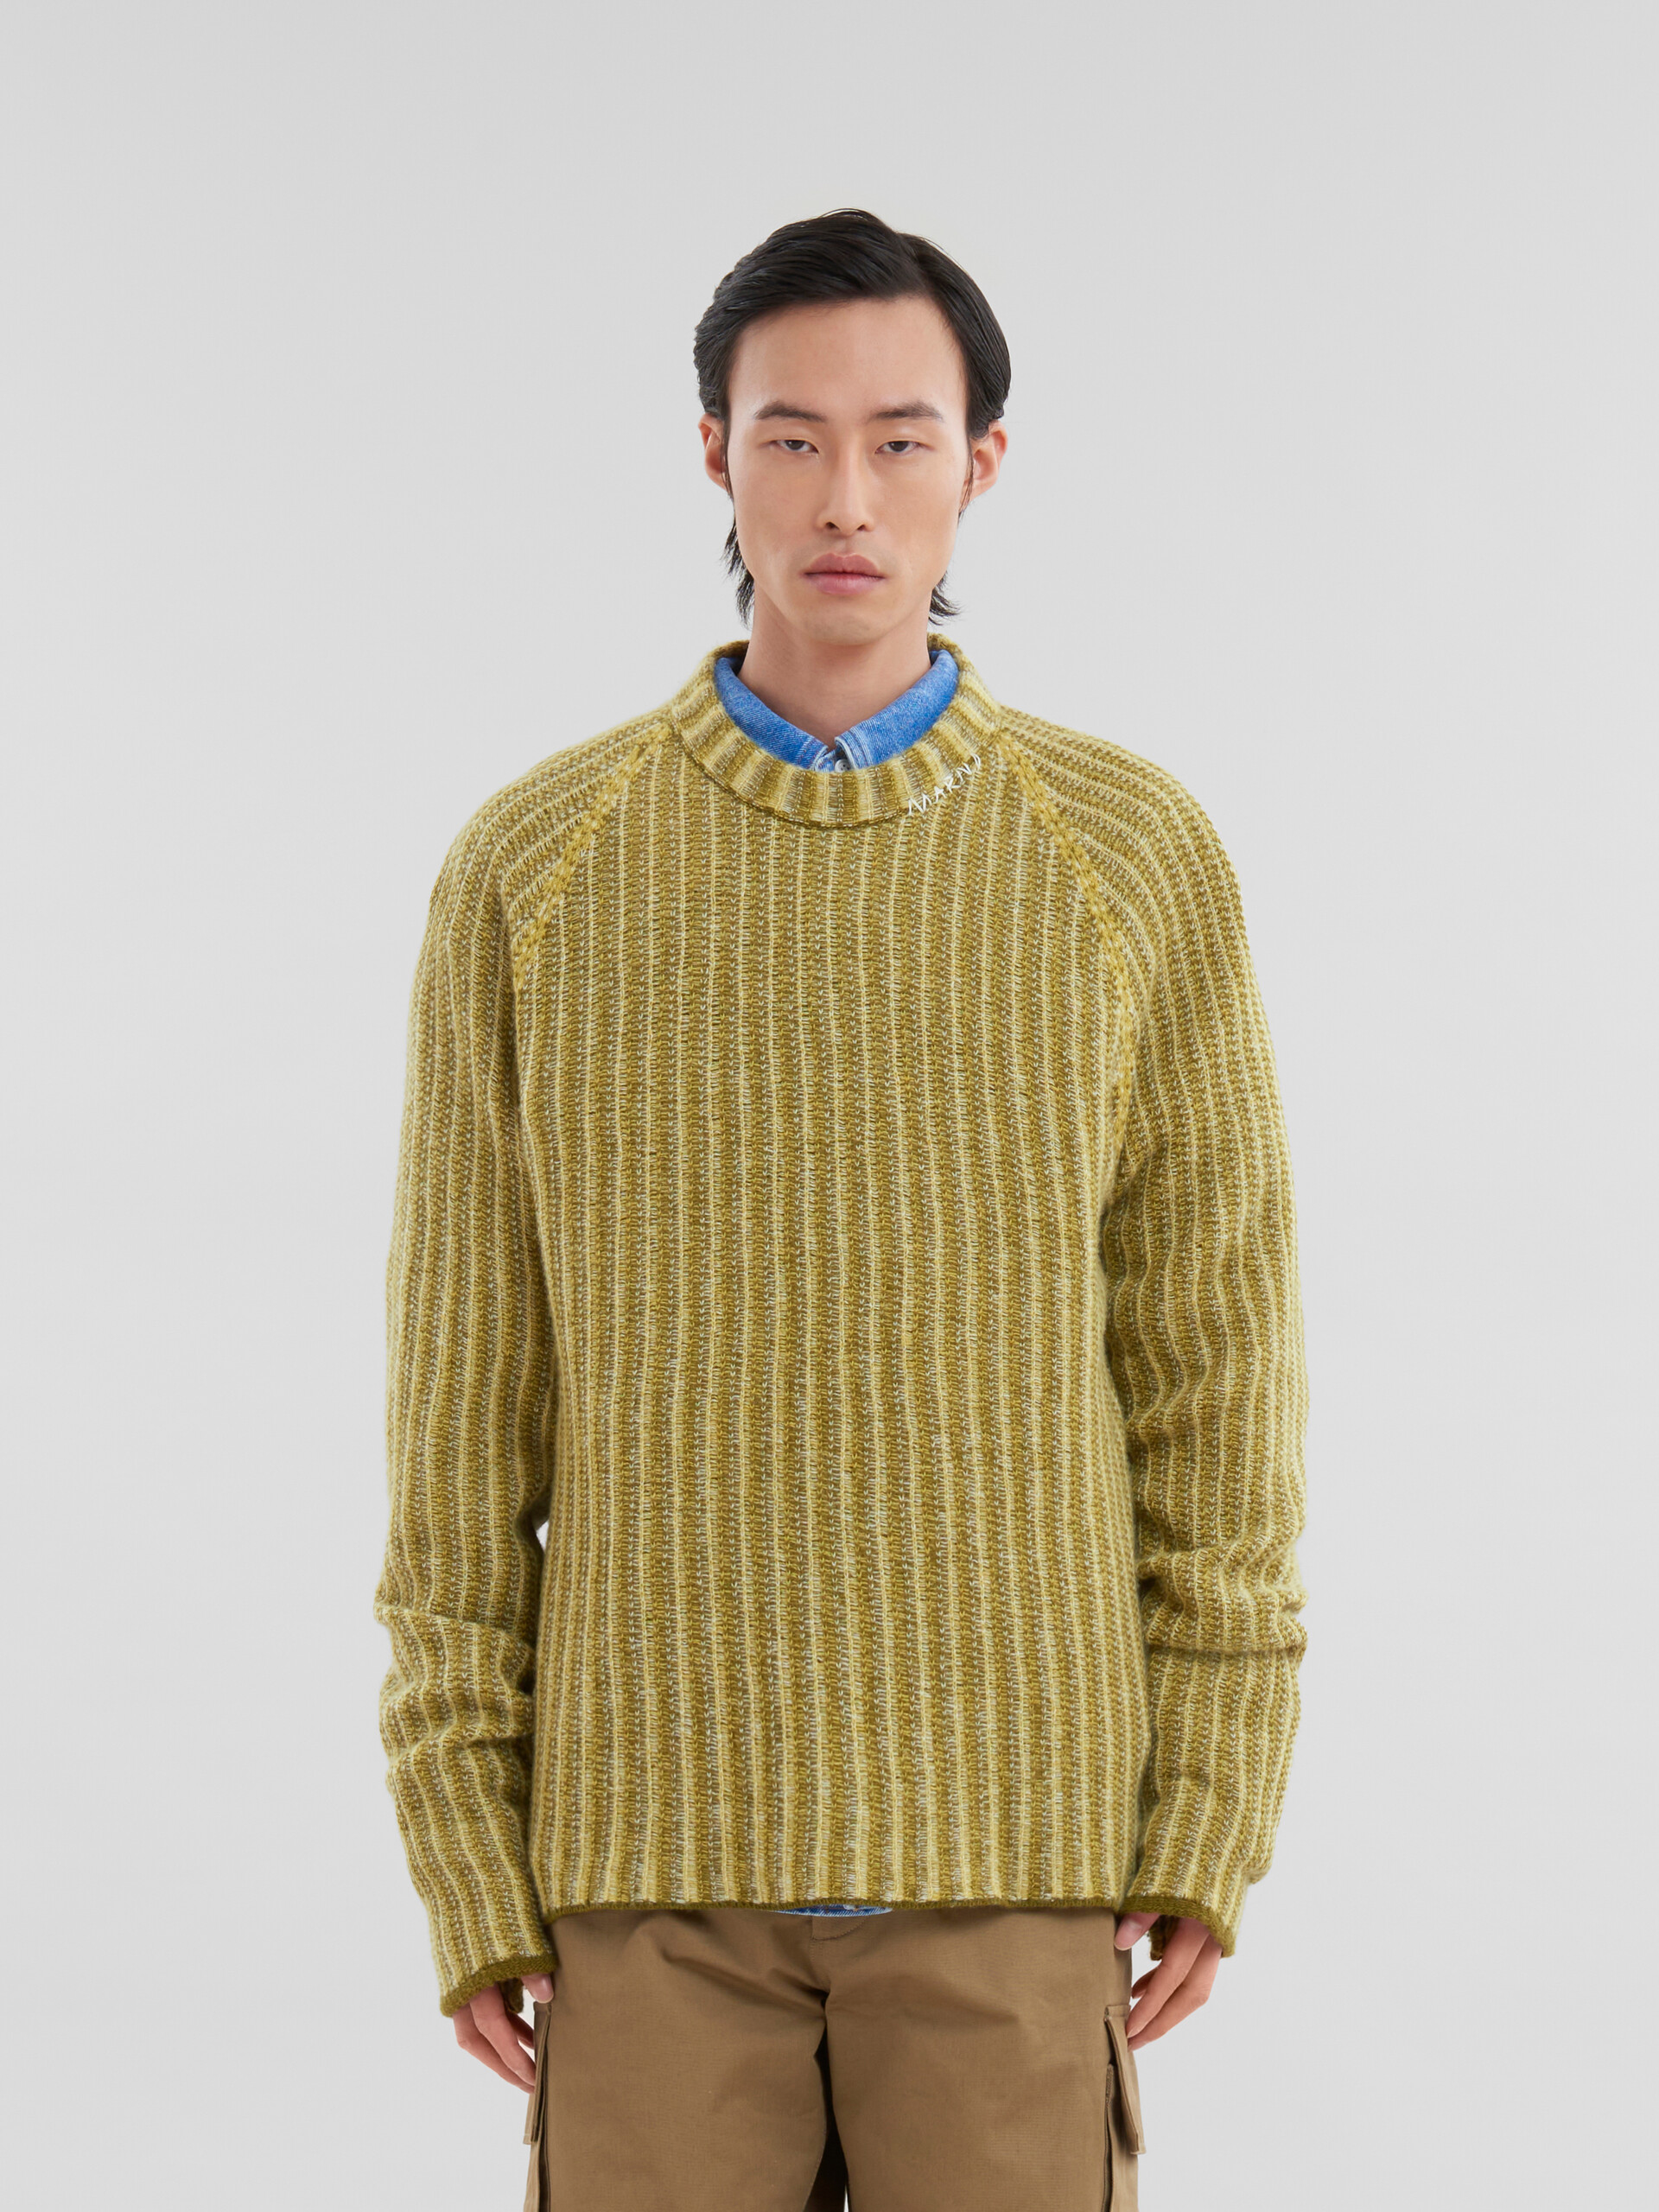 Green wool-cashmere jumper with dégradé stripes - Pullovers - Image 2